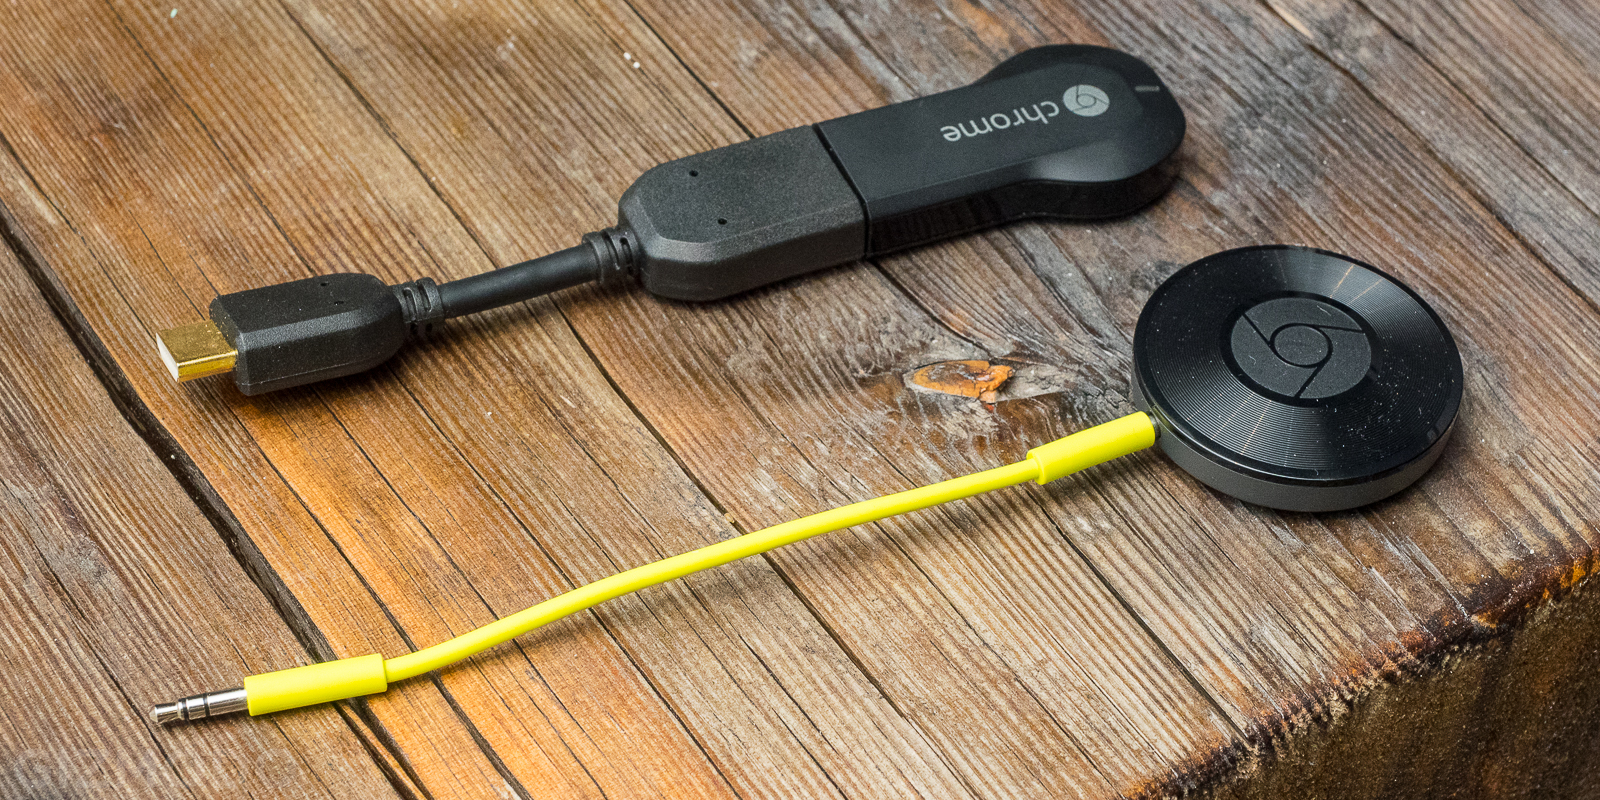 Chromecast Audio Review: A Cheap Way To Teach Your Old Speakers New, Wireless Tricks